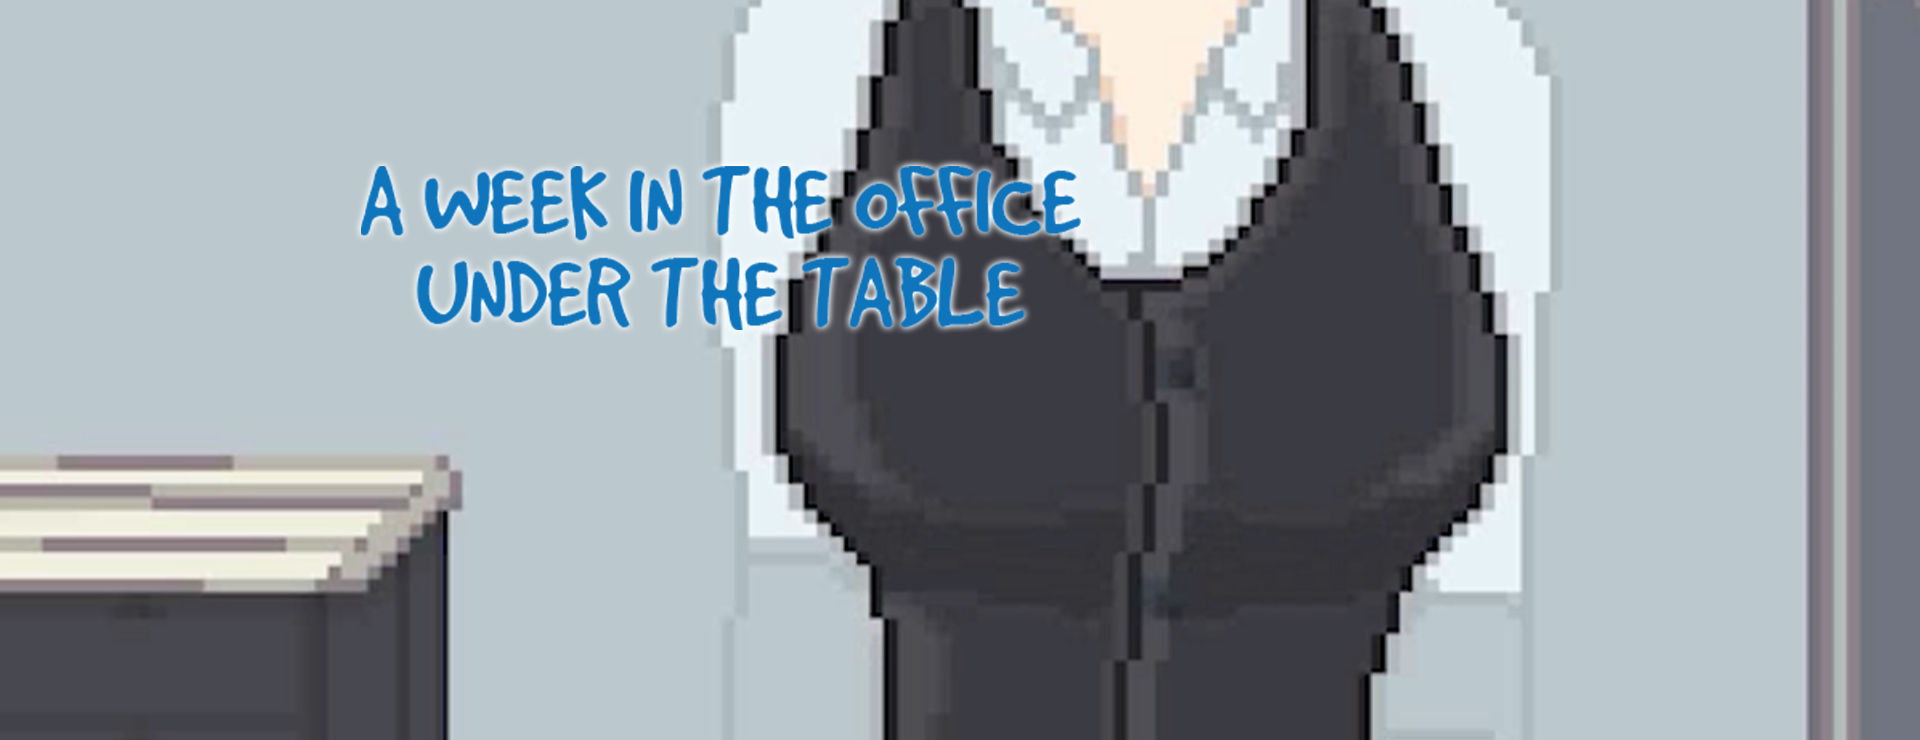 A Week in the Office -Under the Table- - シミュレーション ゲーム